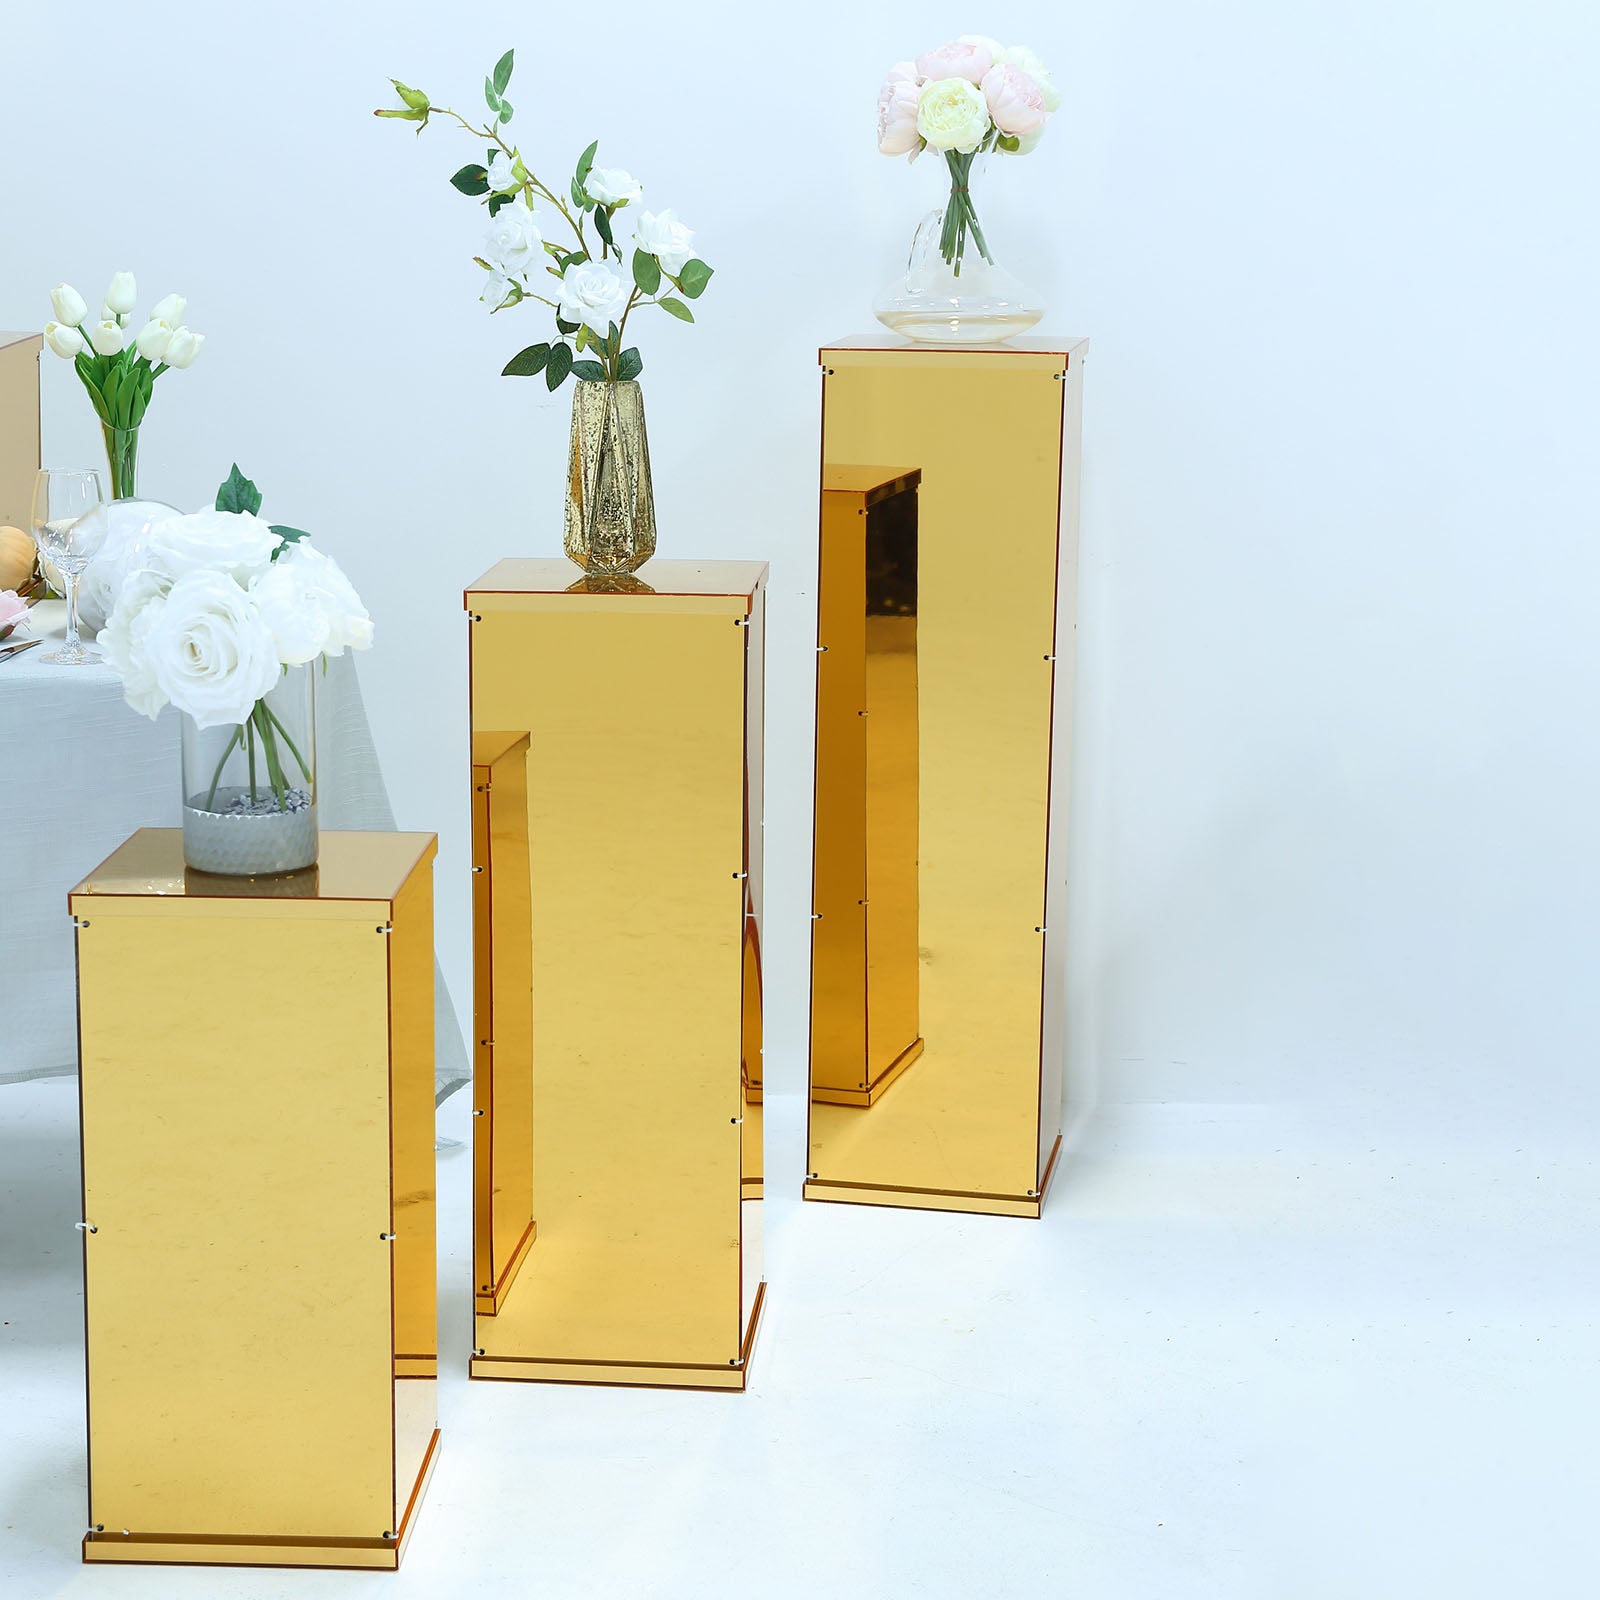 get-your-favorite-players-floor-standing-gold-mirror-finish-acrylic-pedestal-riser-display-box-with-interchangeable-lid-and-base-40-on-sale_16.jpg